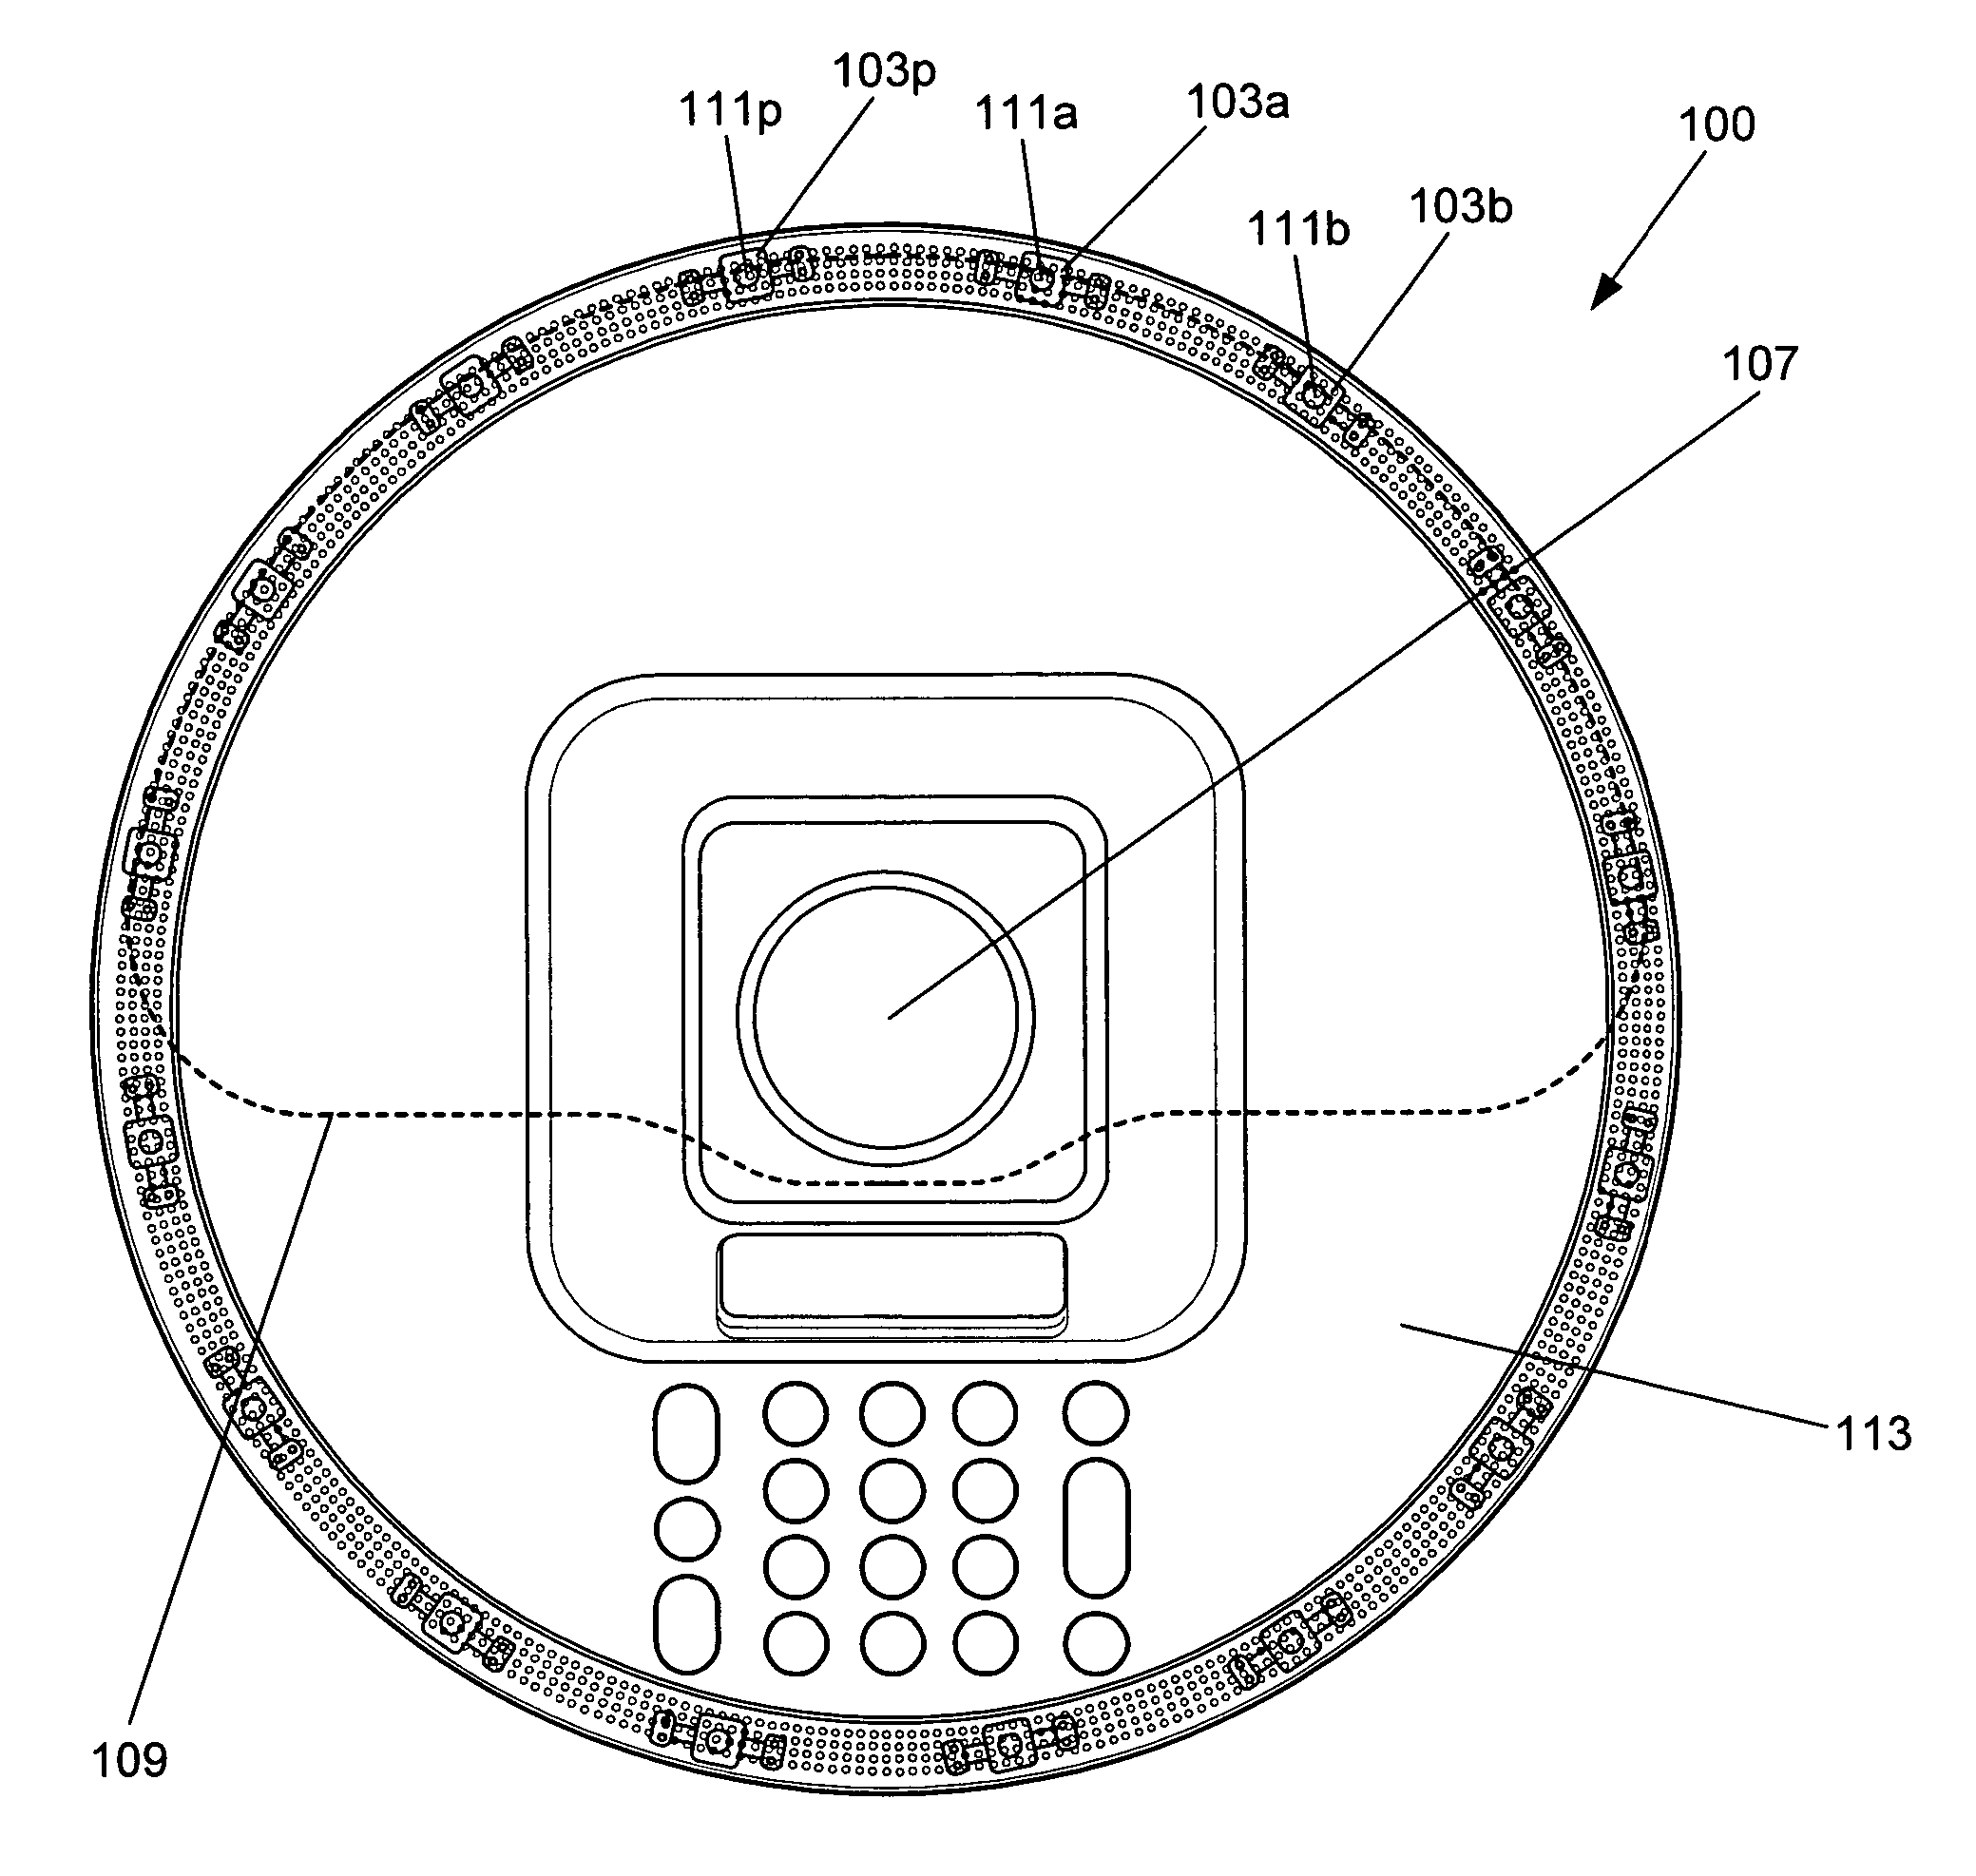 Microphone orientation and size in a speakerphone